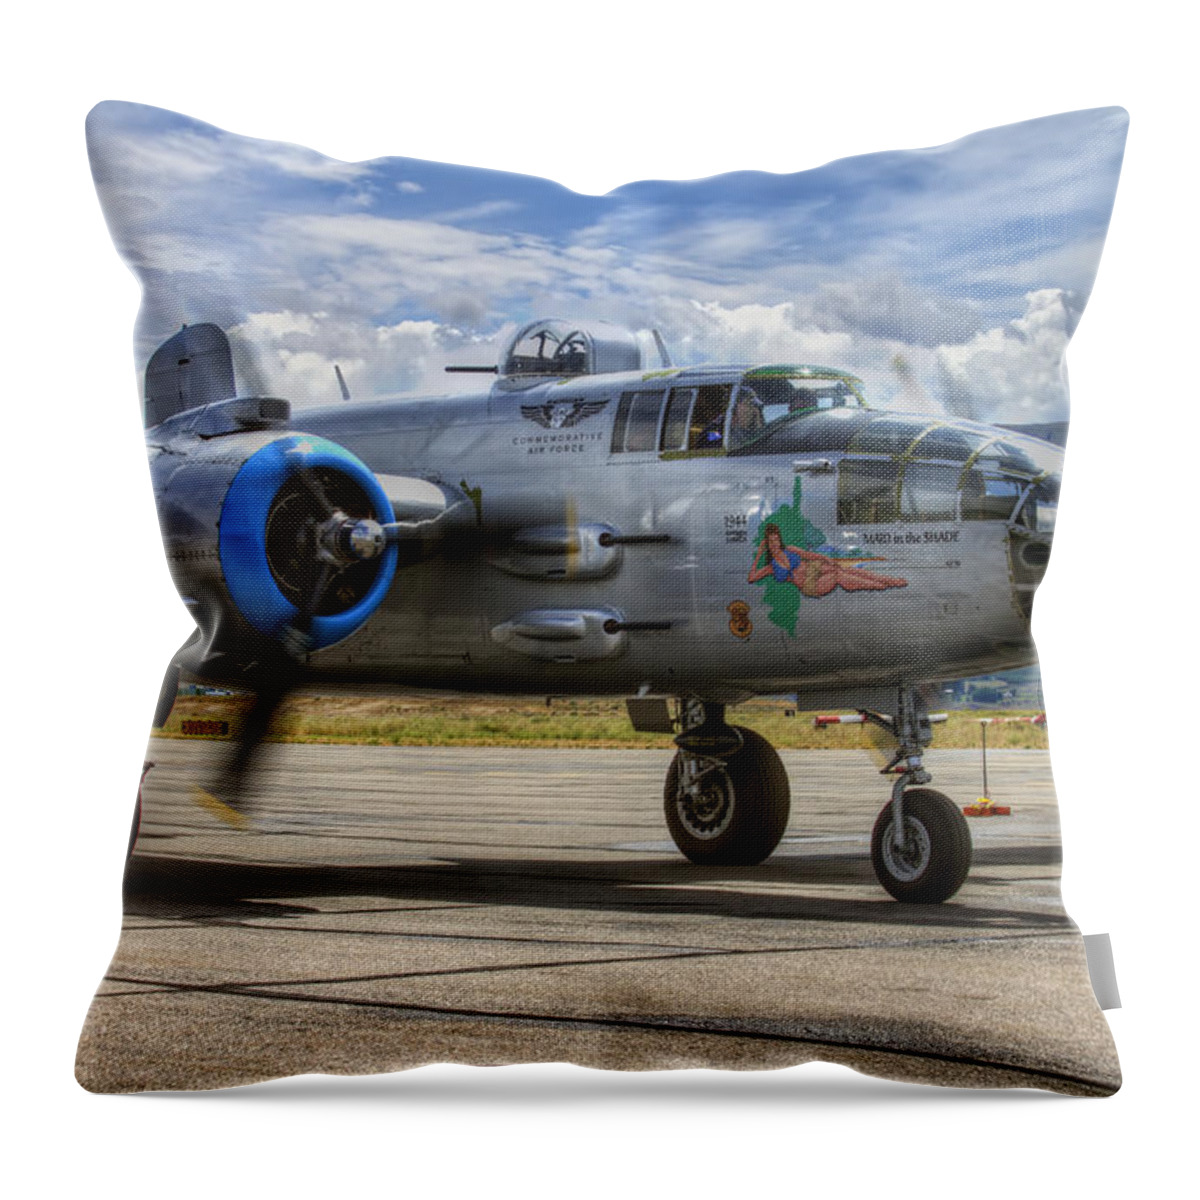 Hdr Throw Pillow featuring the photograph Maid in the Shade by Brad Granger